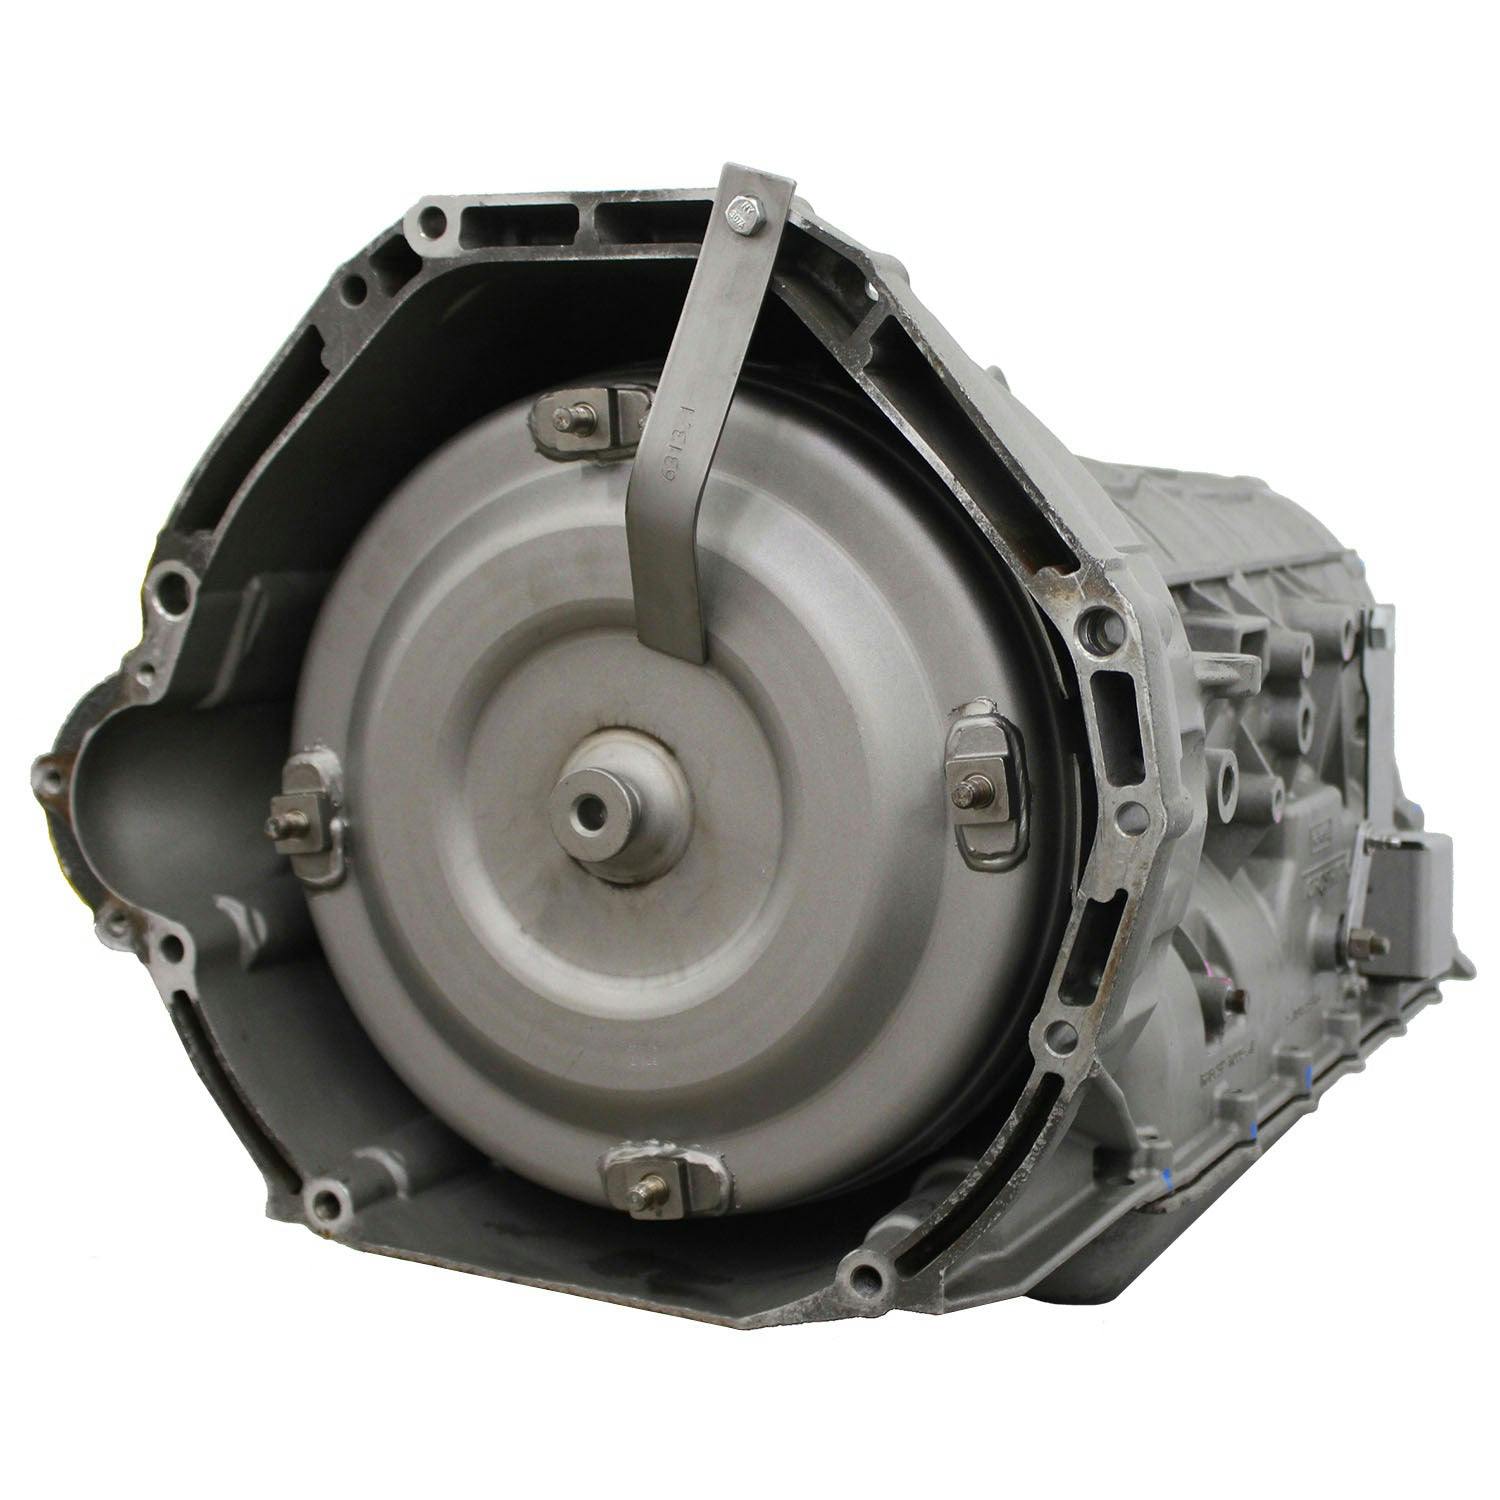 Automatic Transmission for 2012-2014 Ford F-250/350 Super Duty 4WD with 6.2L V8 Engine